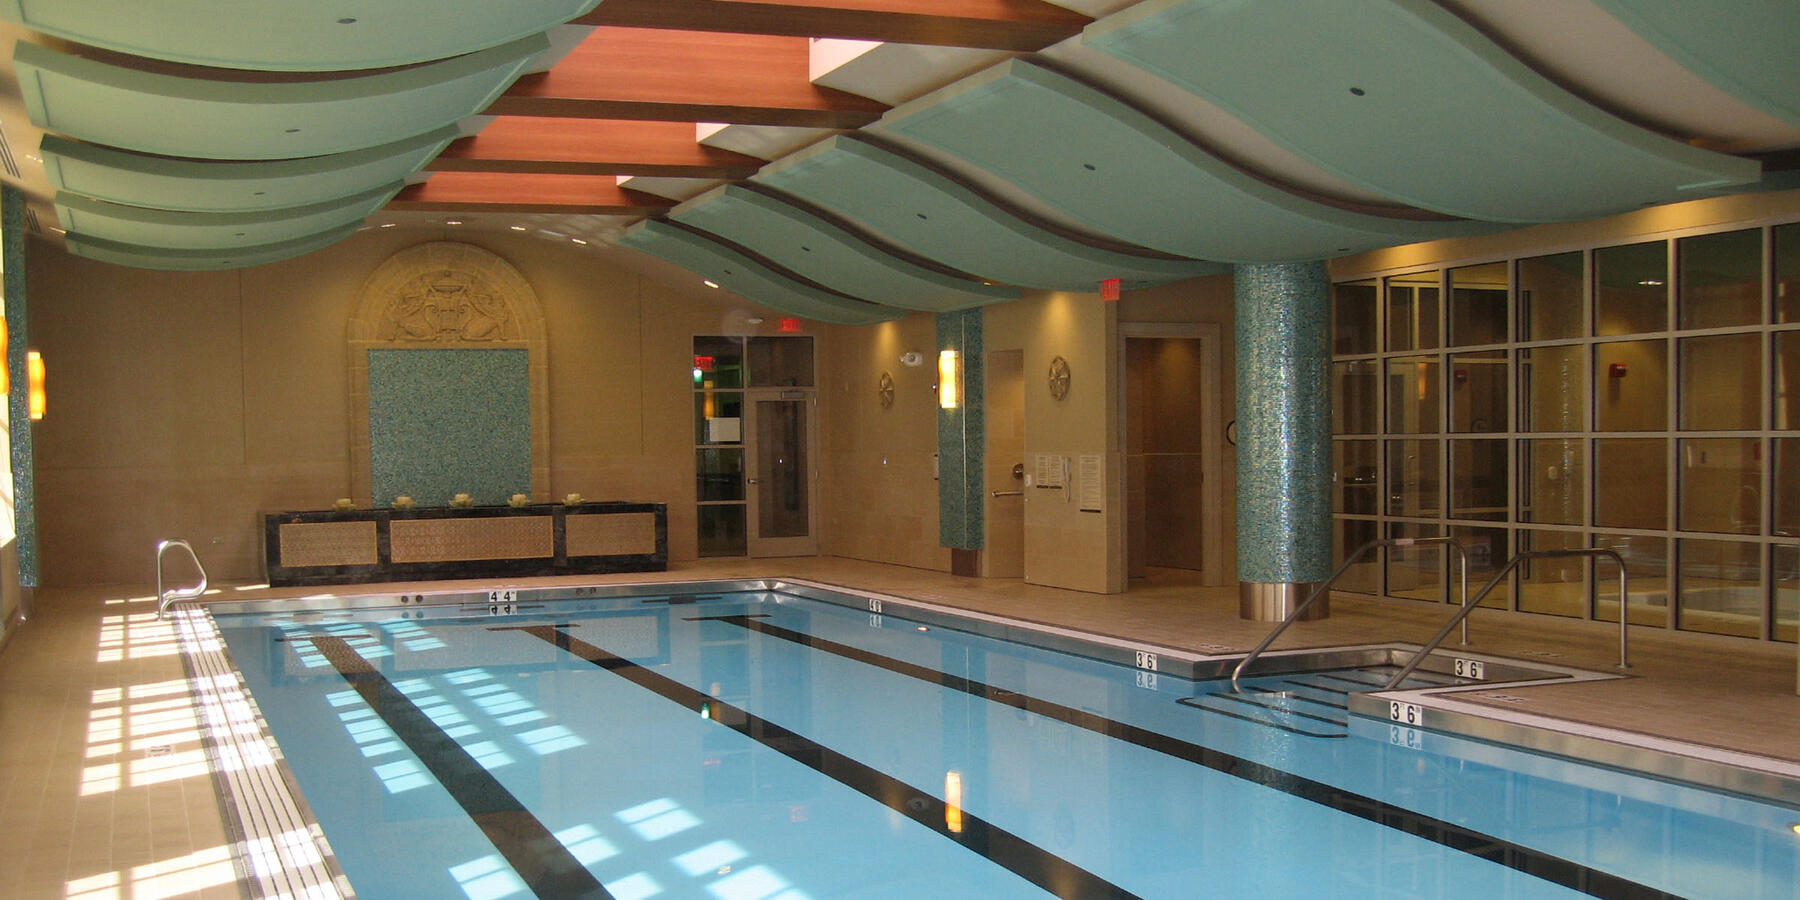 Retirement Community Construction Project - The Mather indoor pool